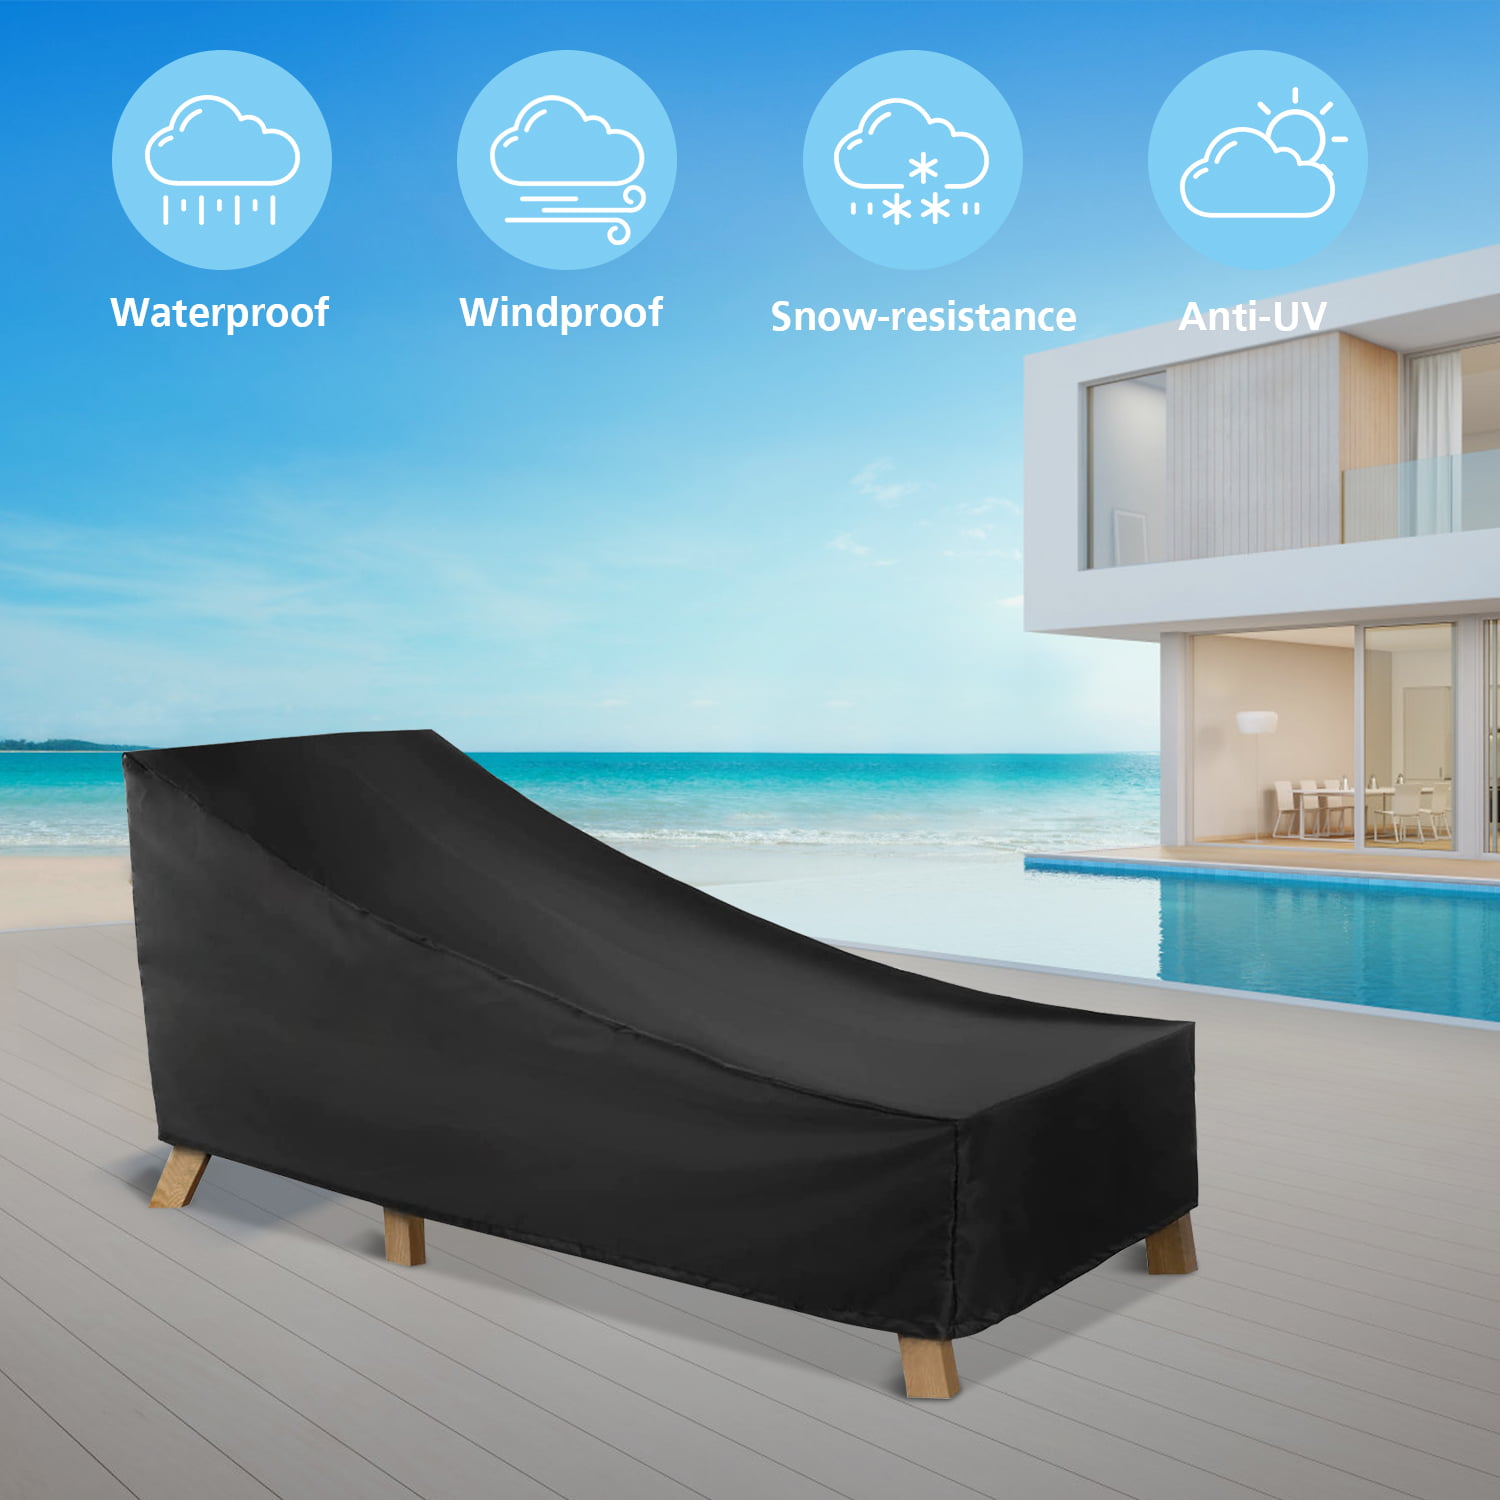 Sqodok Waterproof Outdoor Chaise Lounge Covers 2 Pack Durable Patio Lounge Chair Cover 82inch Black - 82''L x 30''W x 31''H 